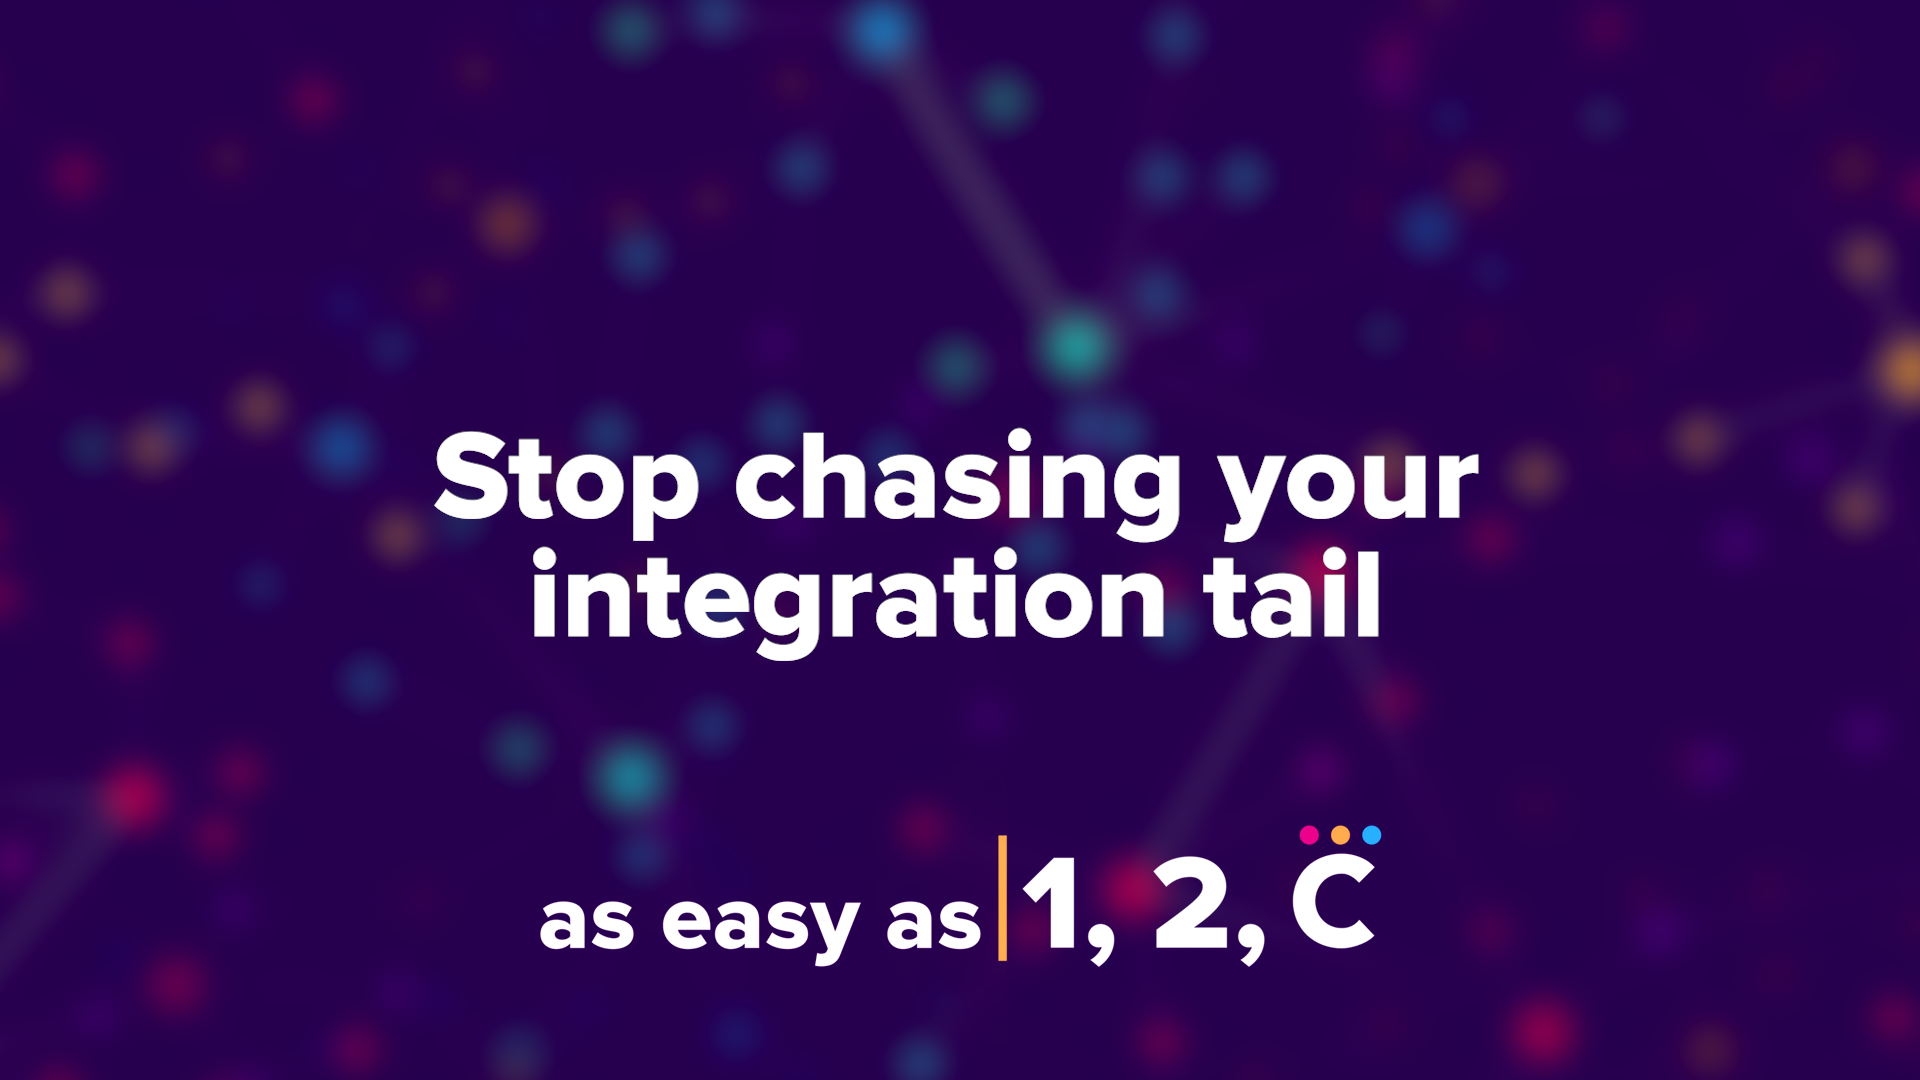 As Easy As 1, 2, C: Stop Chasing Your Integration Tail